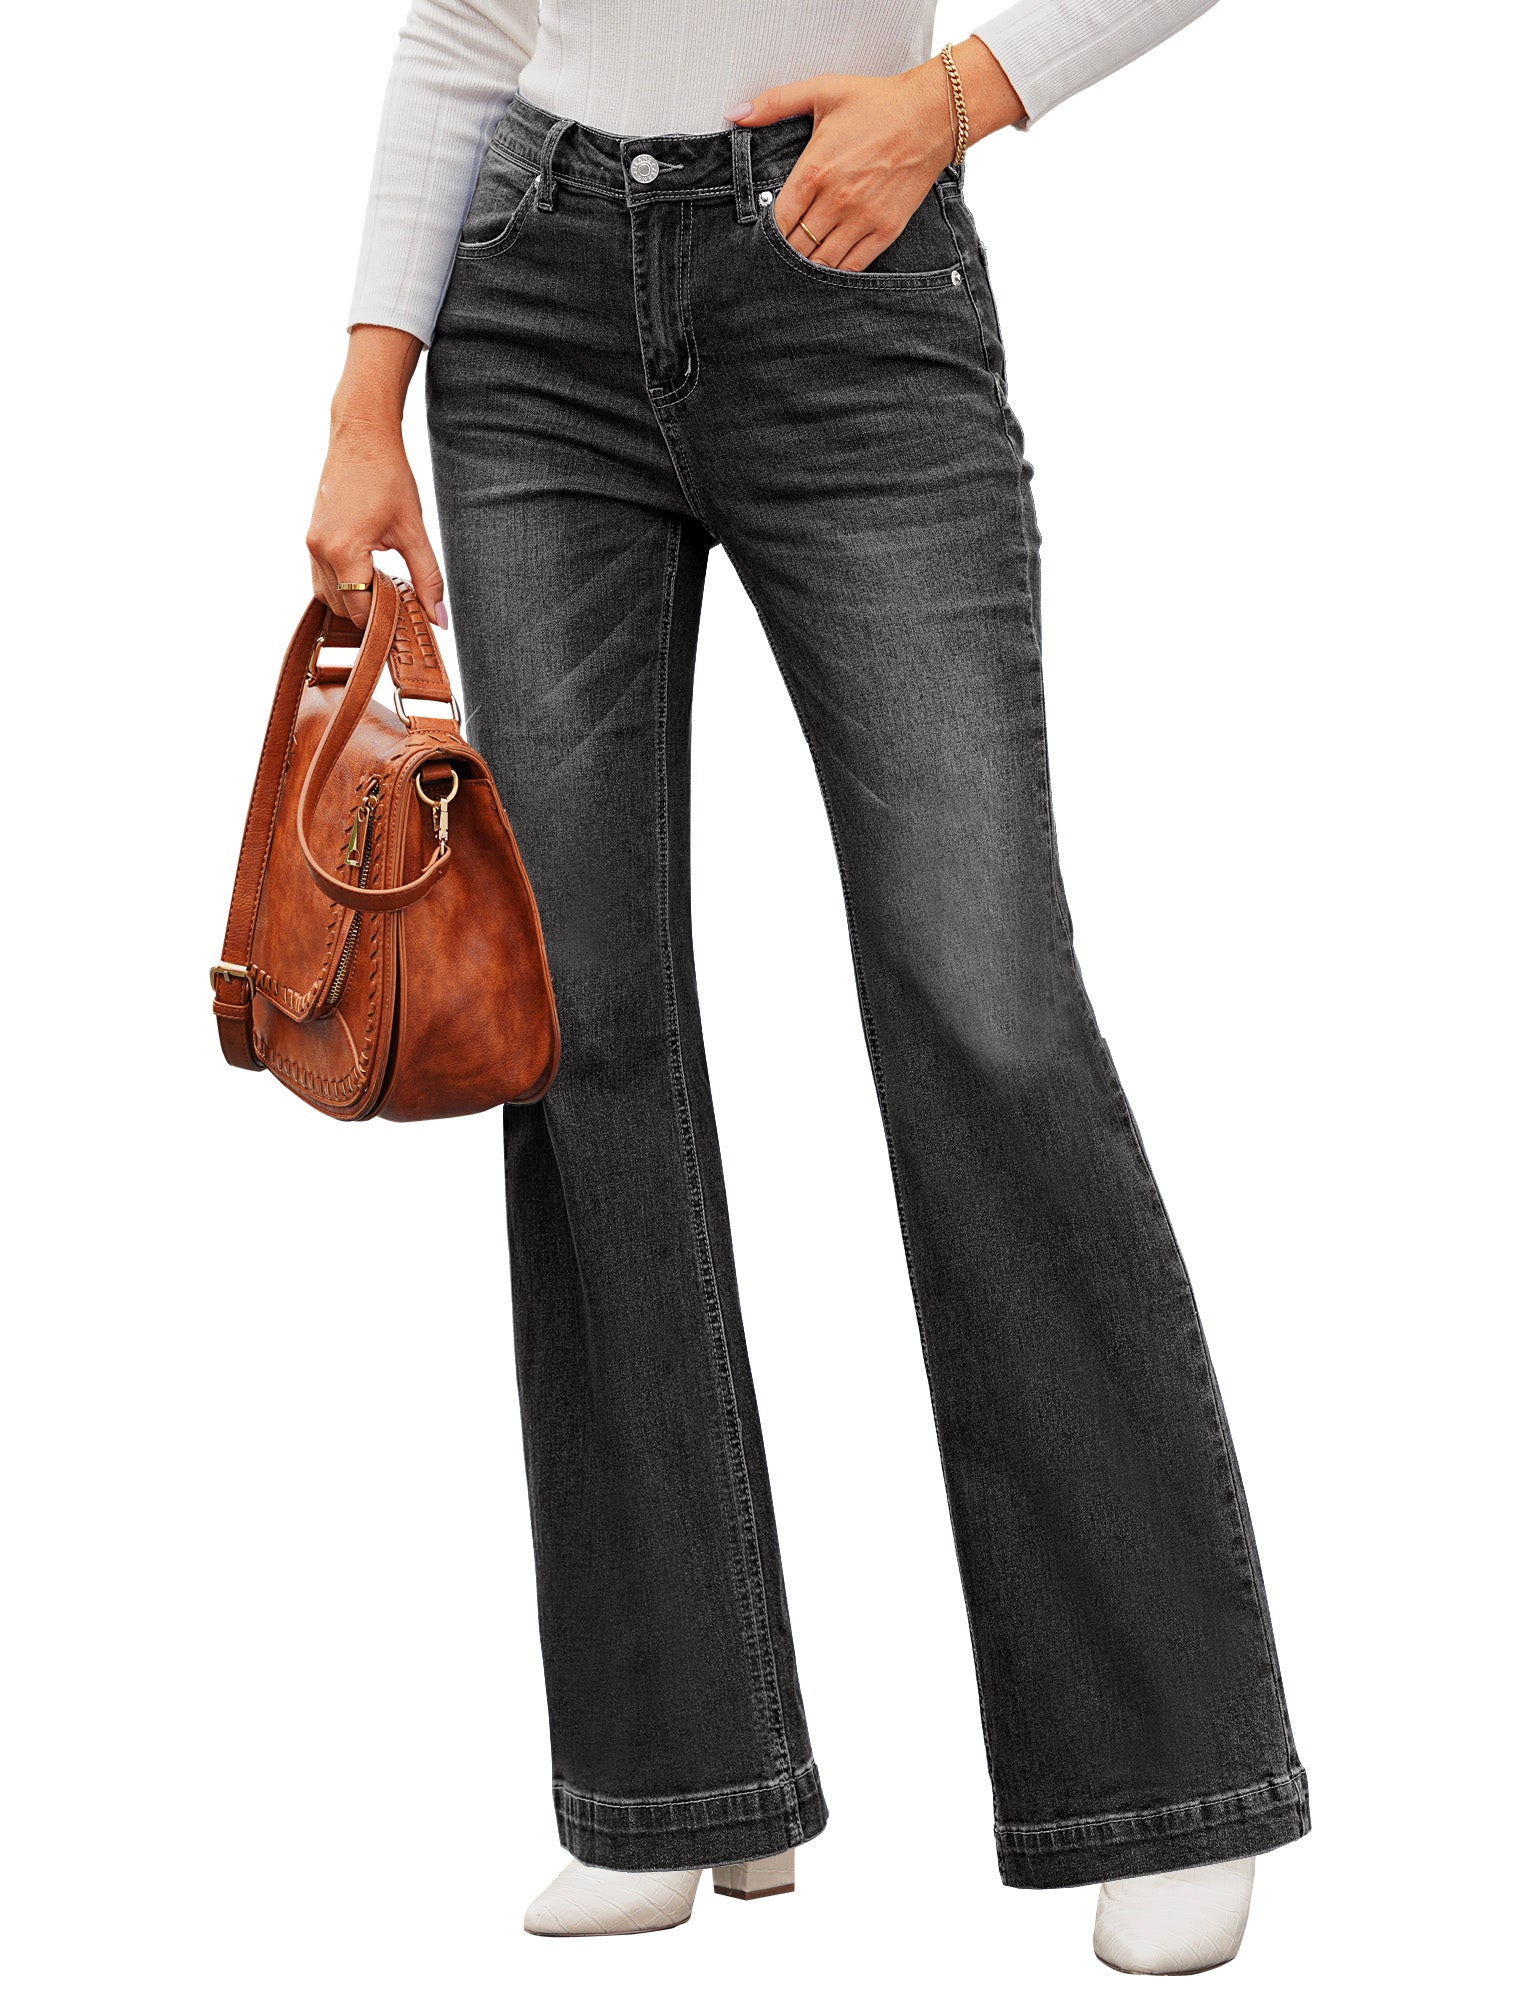 GRAPENT Flare Pants for Women High Wasited Stretchy Faux Leather Look  Button Fly Jeans Trendy Bell Bottom Trousers